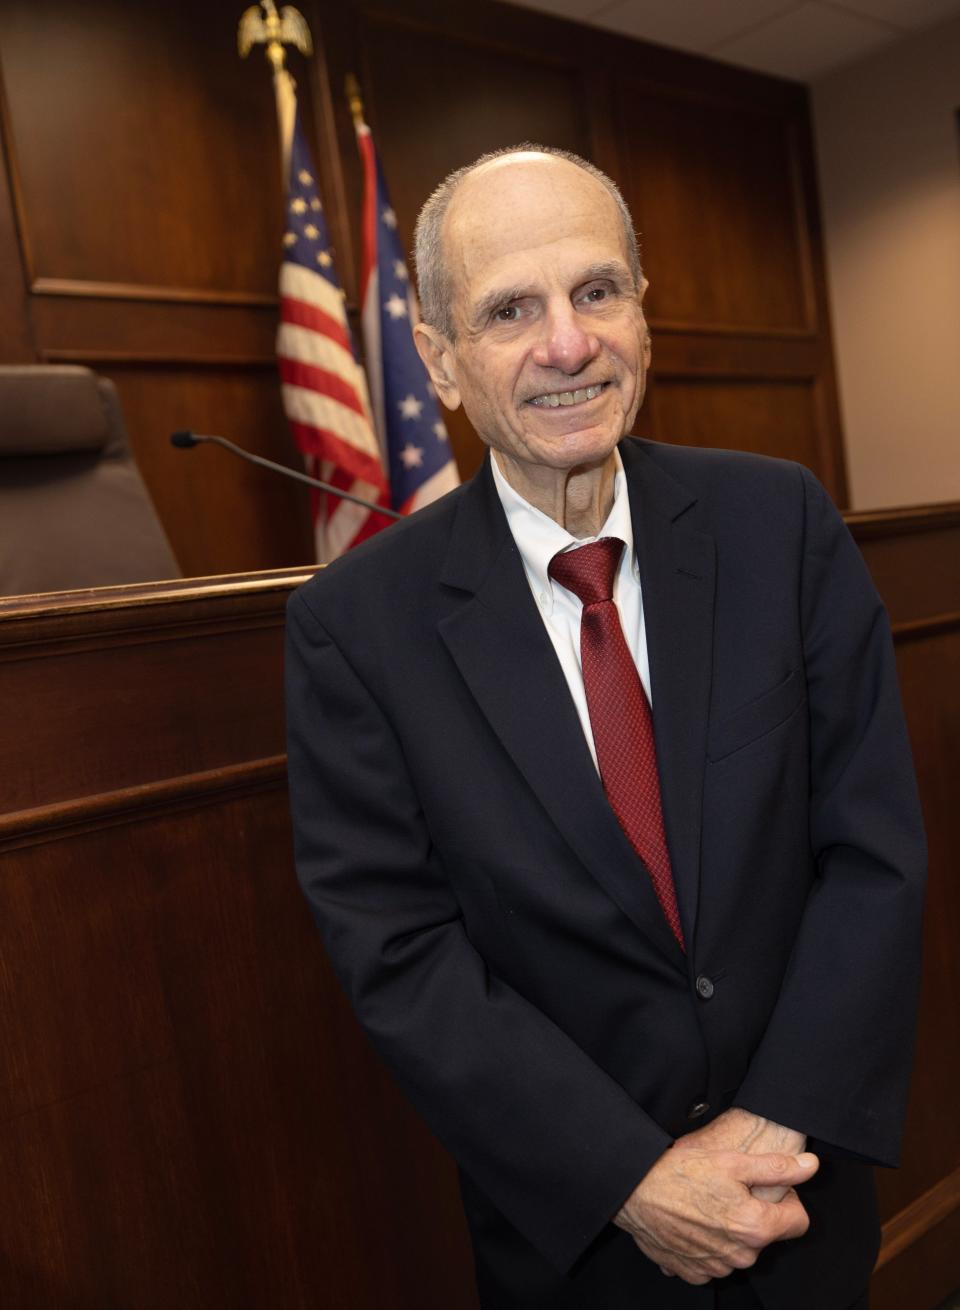 Judge John A. Poulos is retiring at the end of the year after 30 years on the bench in Canton Municipal Court.